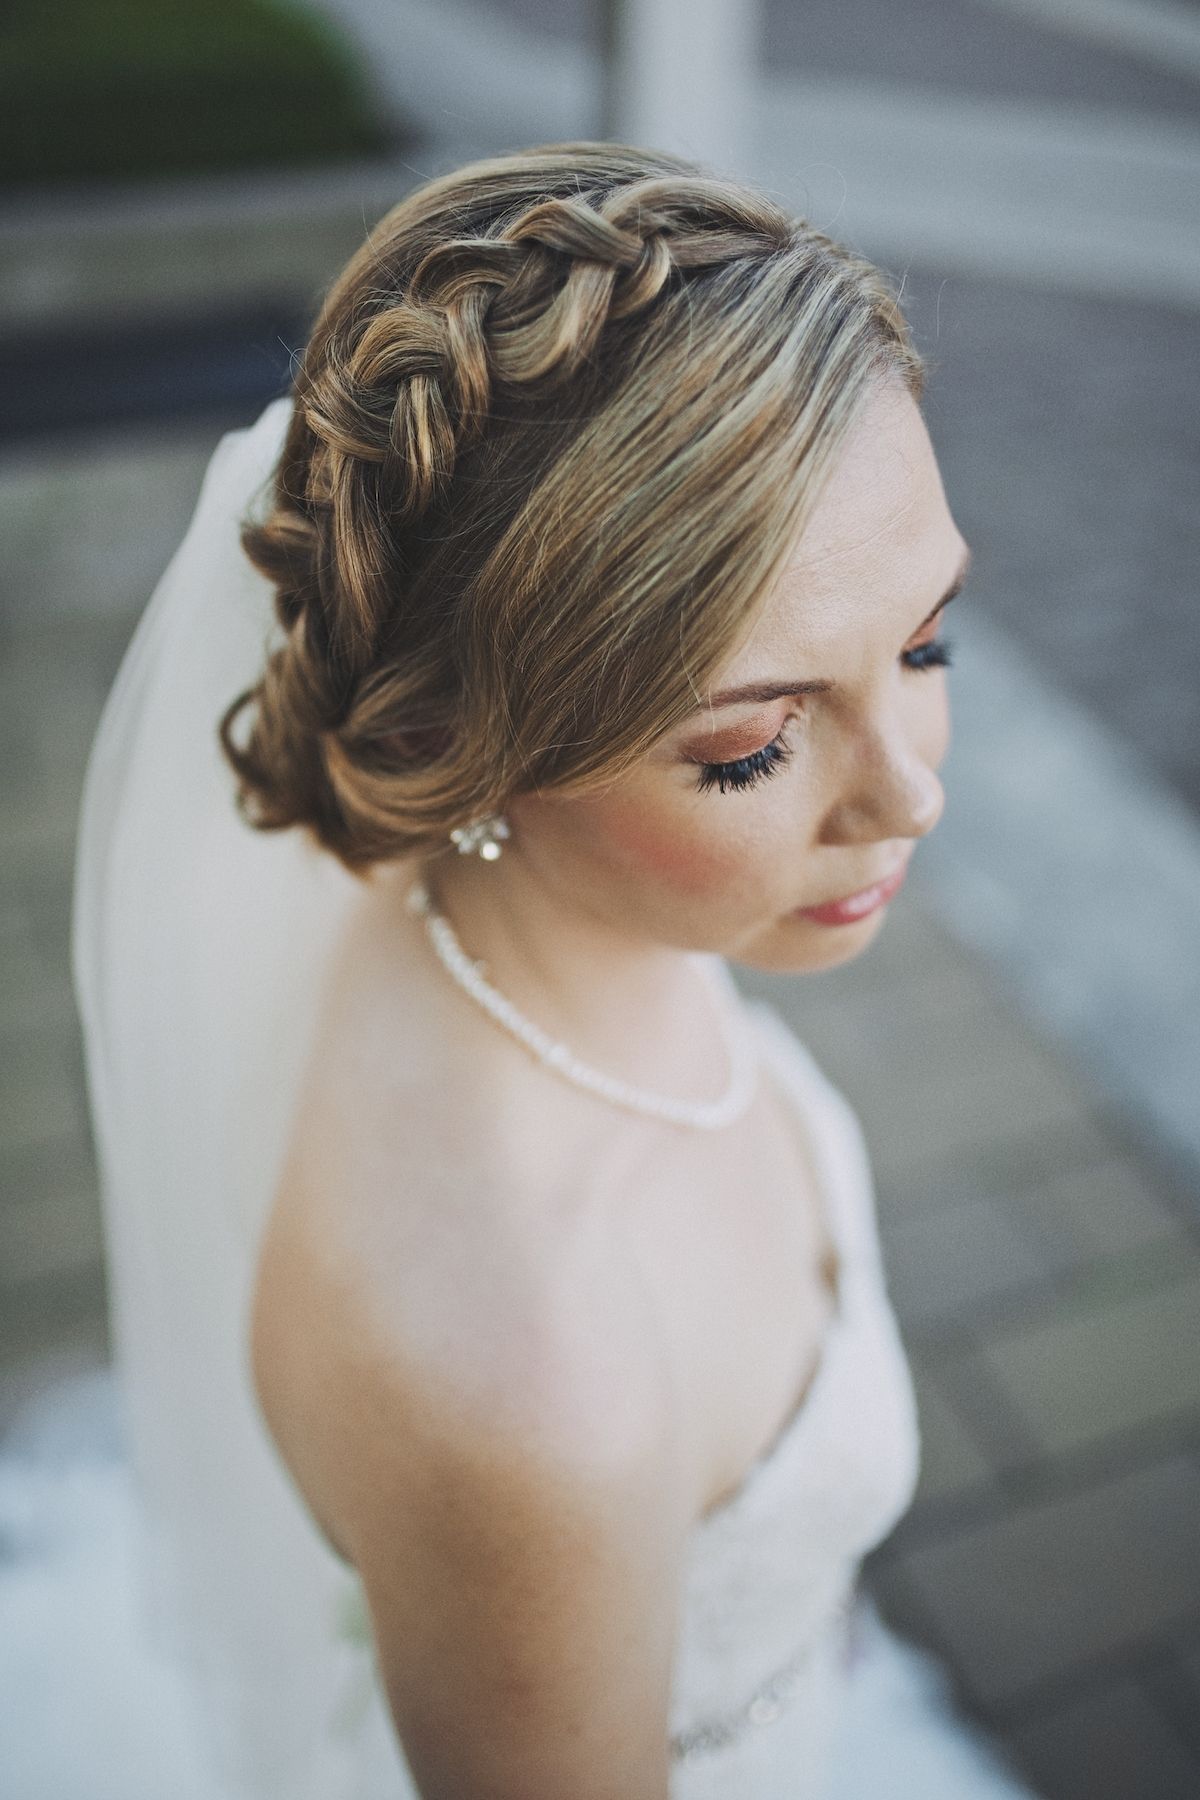 2018 Up Hairstyles With Veil For Wedding Throughout Endearing Bride Hairstyles With Veil In Updo Upstyle Braid Dutch (View 15 of 15)